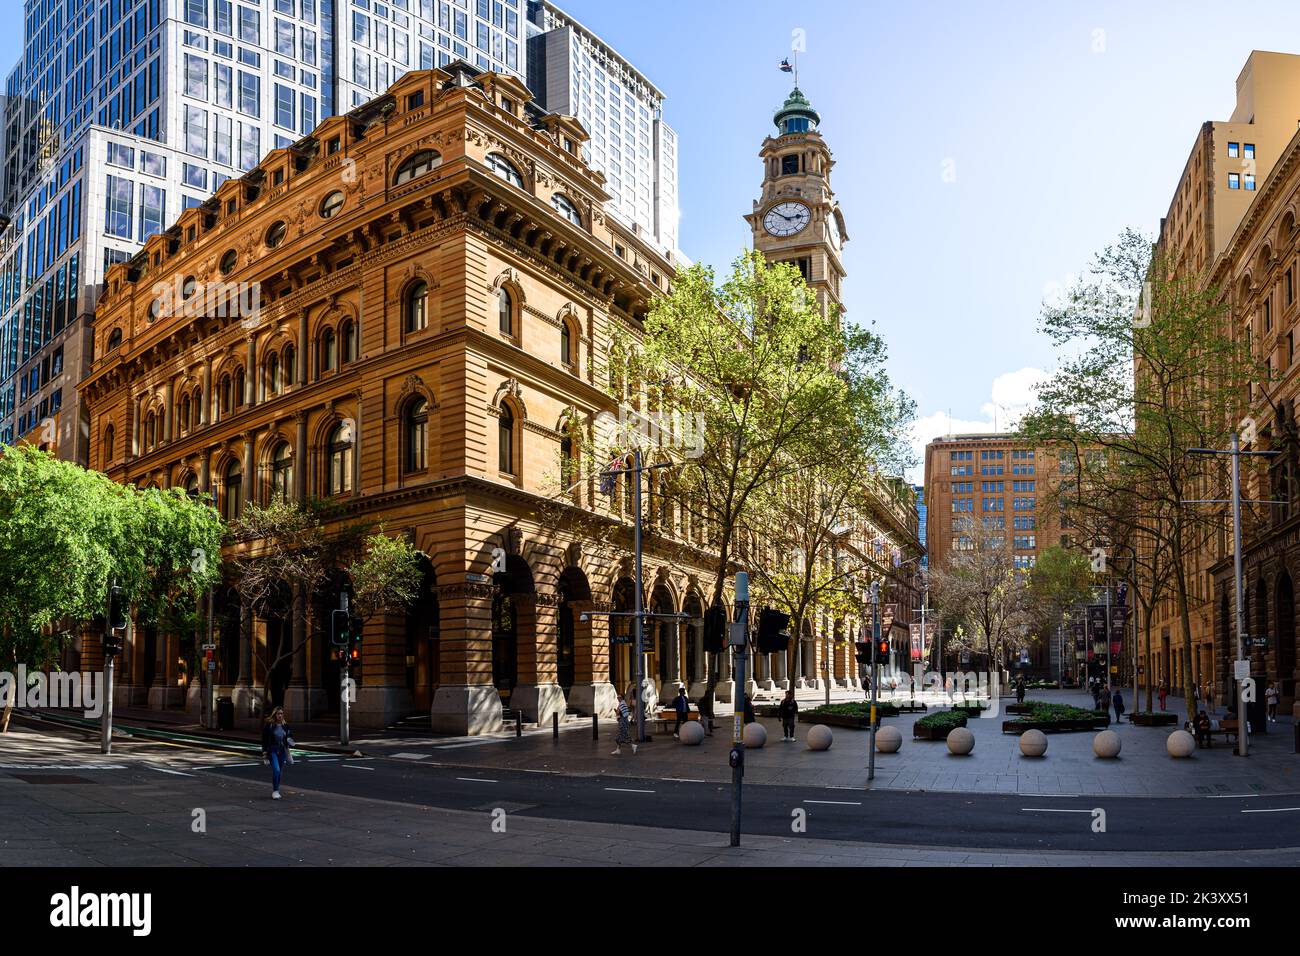 The General Post Office building with a clock tower at Martin Place in Sydney, New South Wales Stock Photo